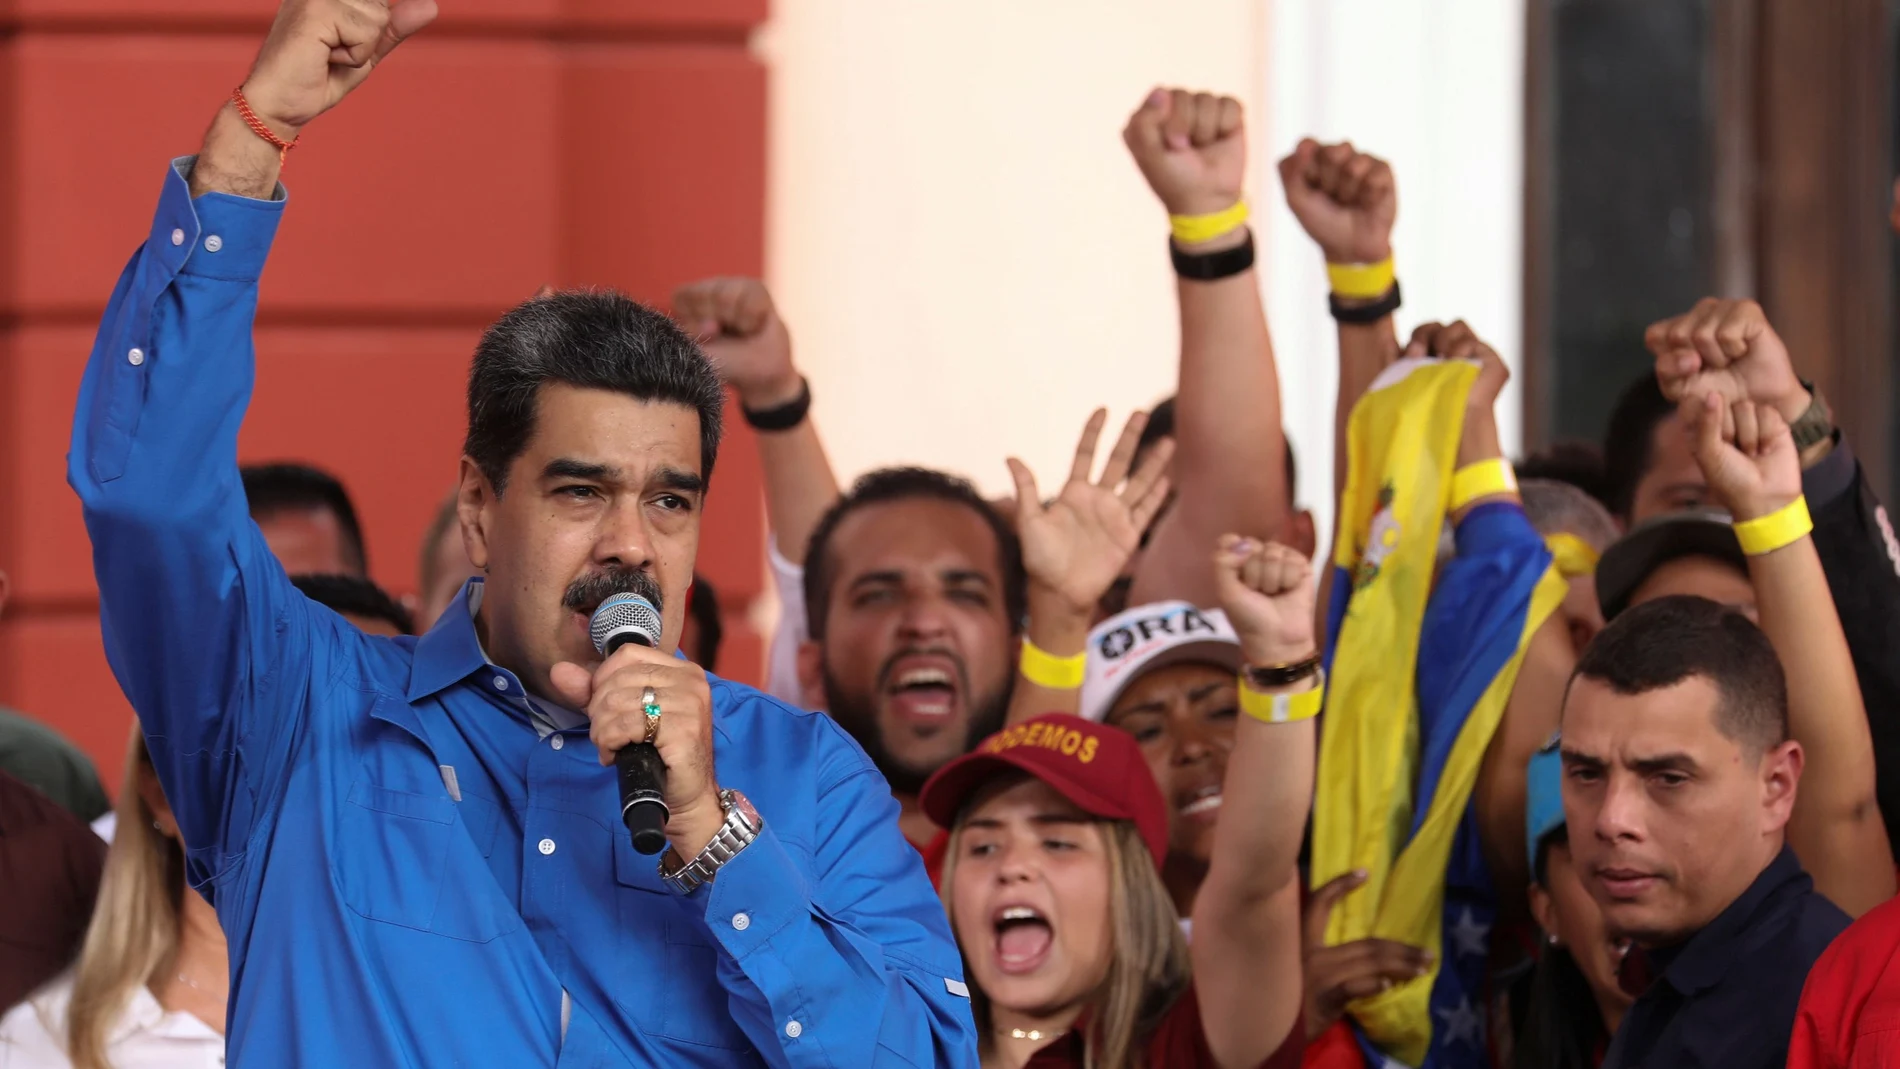 Venezuela's President Nicolas Maduro takes part in a rally commemorating the Youth Day, in Caracas